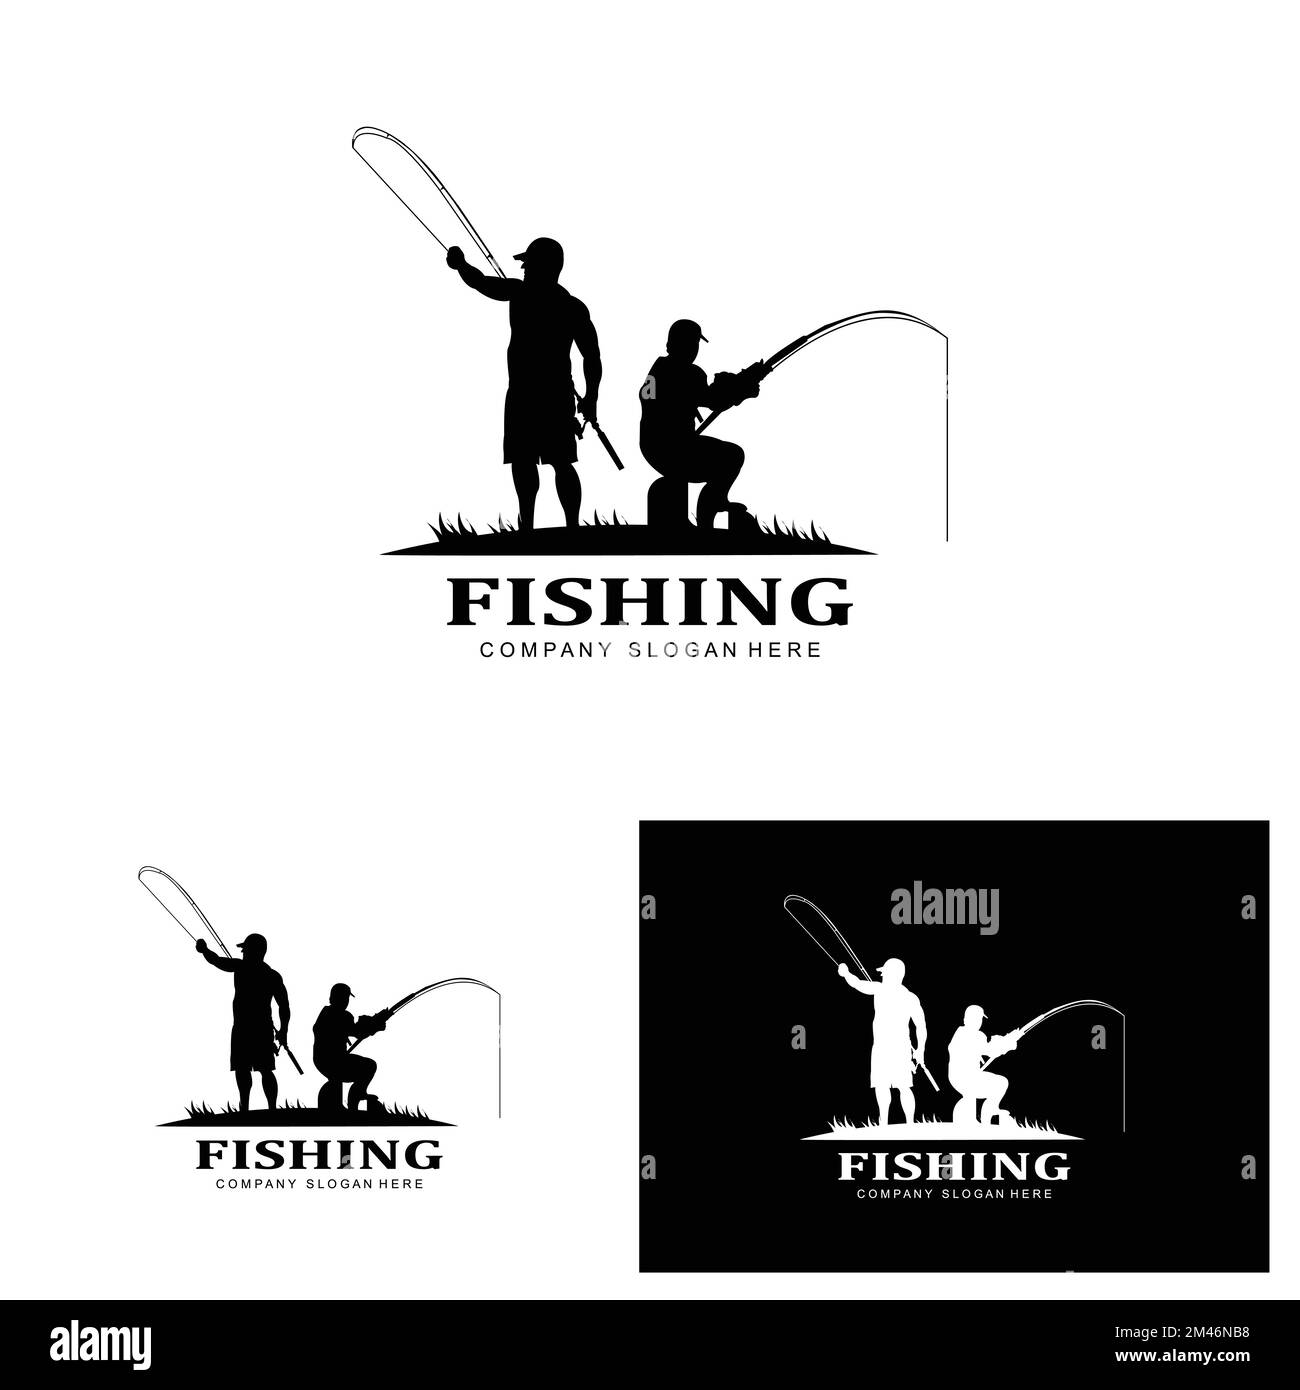 https://c8.alamy.com/comp/2M46NB8/fishing-logo-icon-vector-catch-fish-on-the-boat-outdoor-sunset-silhouette-design-2M46NB8.jpg